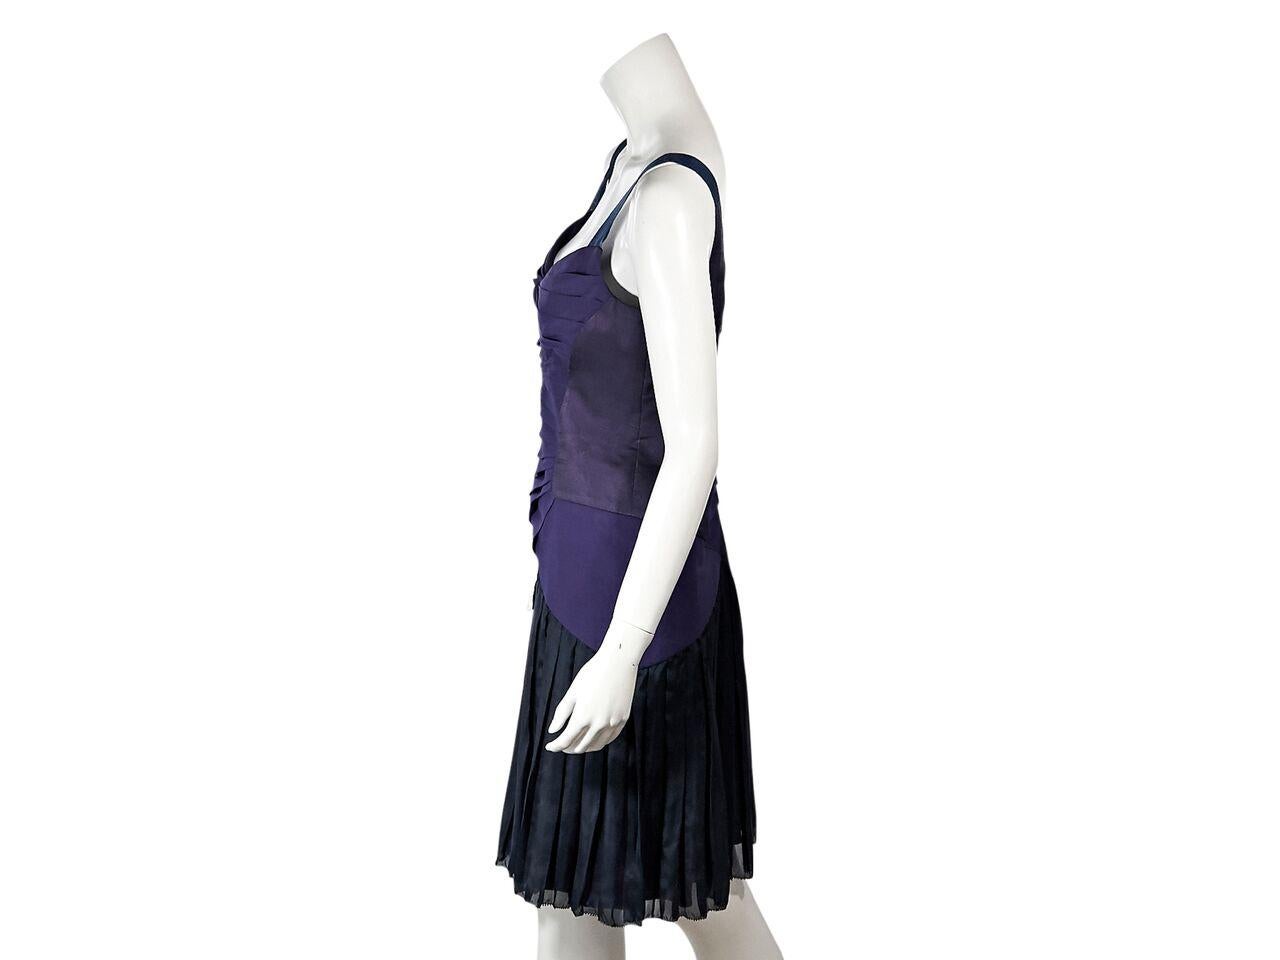 Product details:  Tonal purple pleated silk cocktail dress by Zac Posen.  Sweetheart scoopneck.  Sleeveless.  Concealed back zip closure.  38